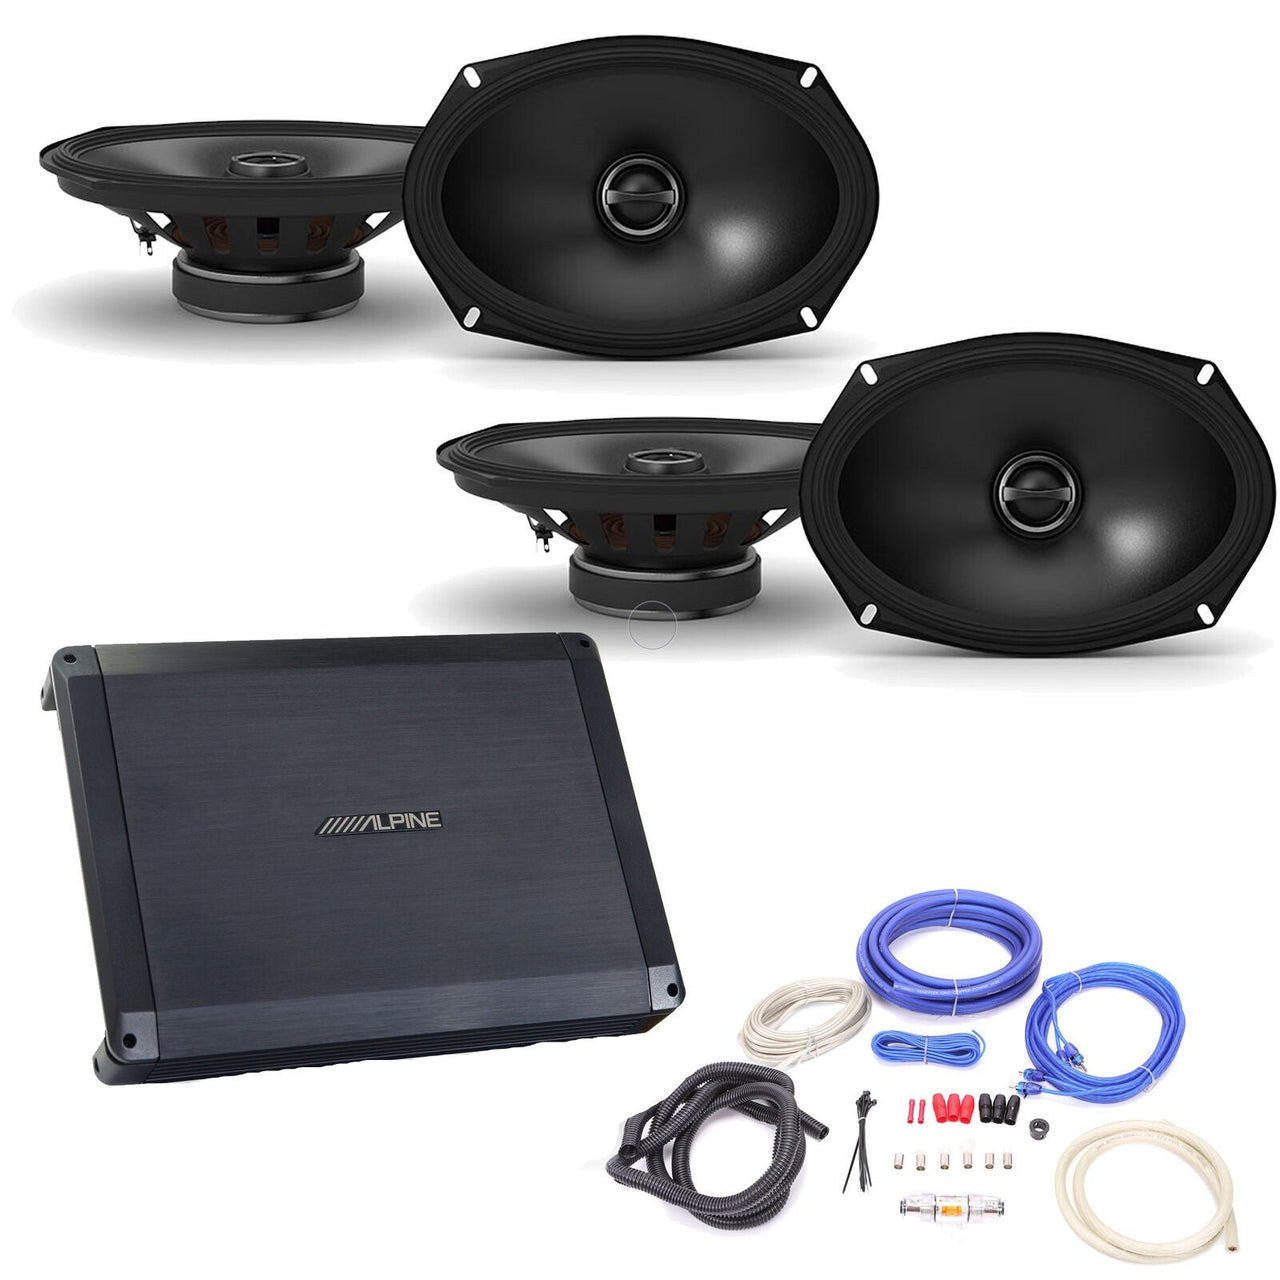 Alpine BBX-F1200 Amplifier with Two Pair Of Alpine S-S69 6X9 Coax Speakers, and Wiring Kit